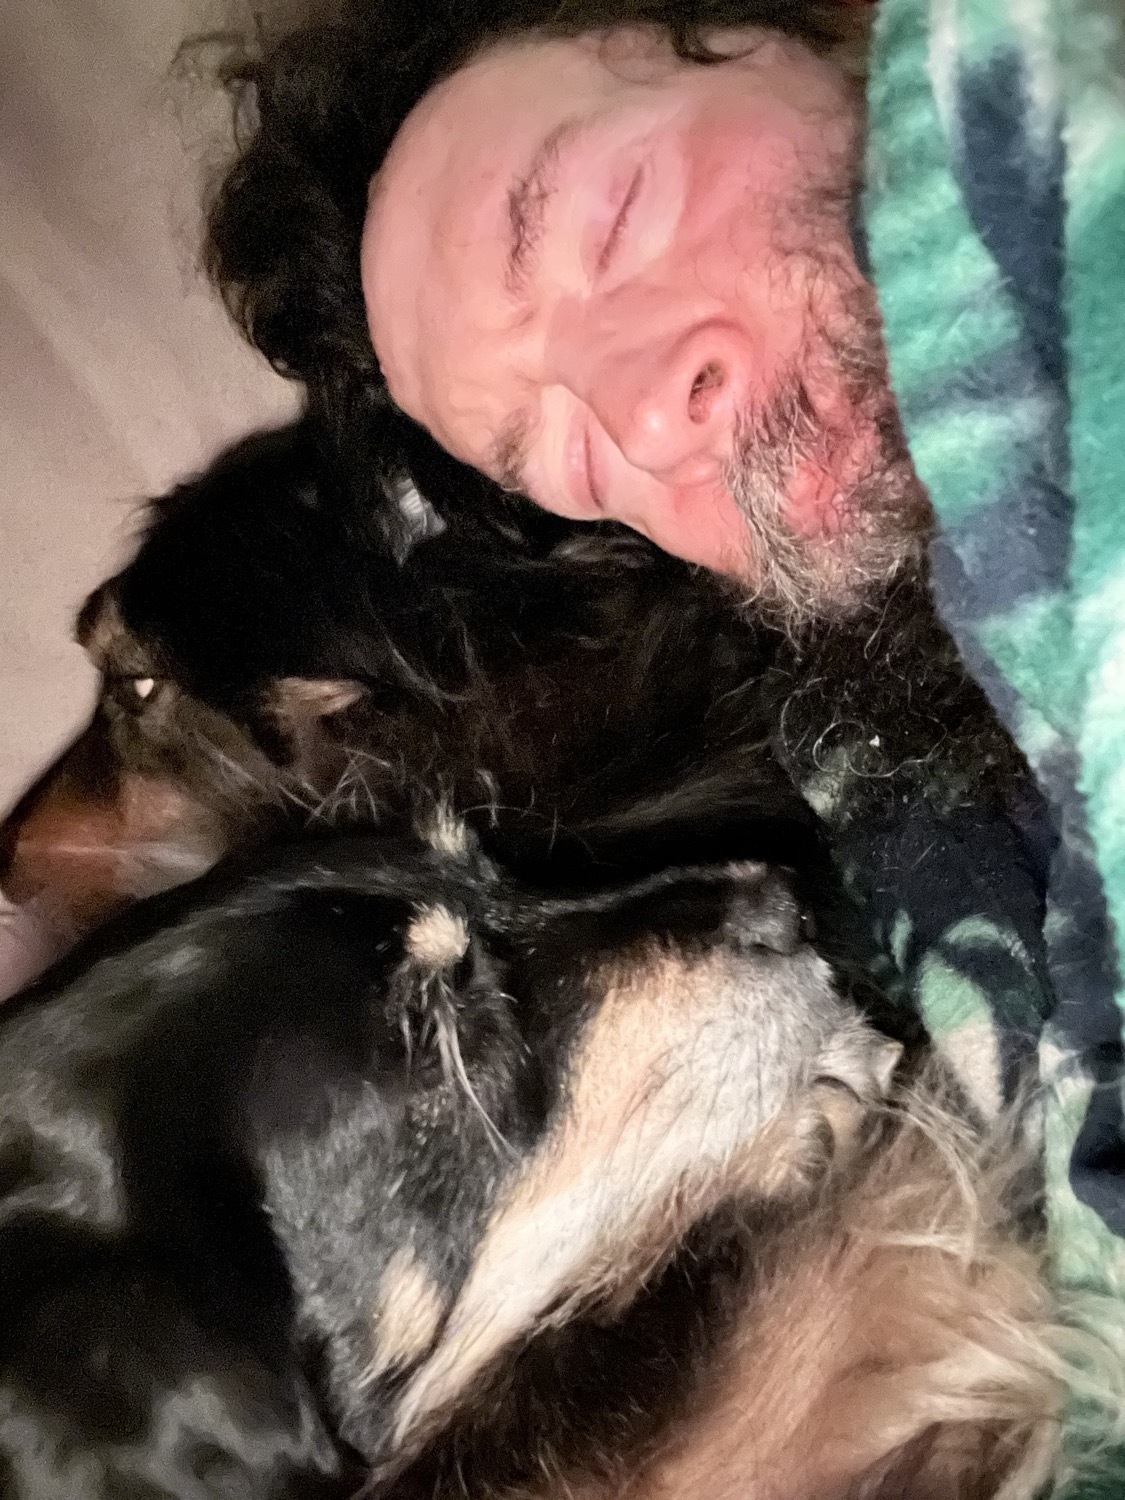 Two dogs nestled closely to a human trying to sleep